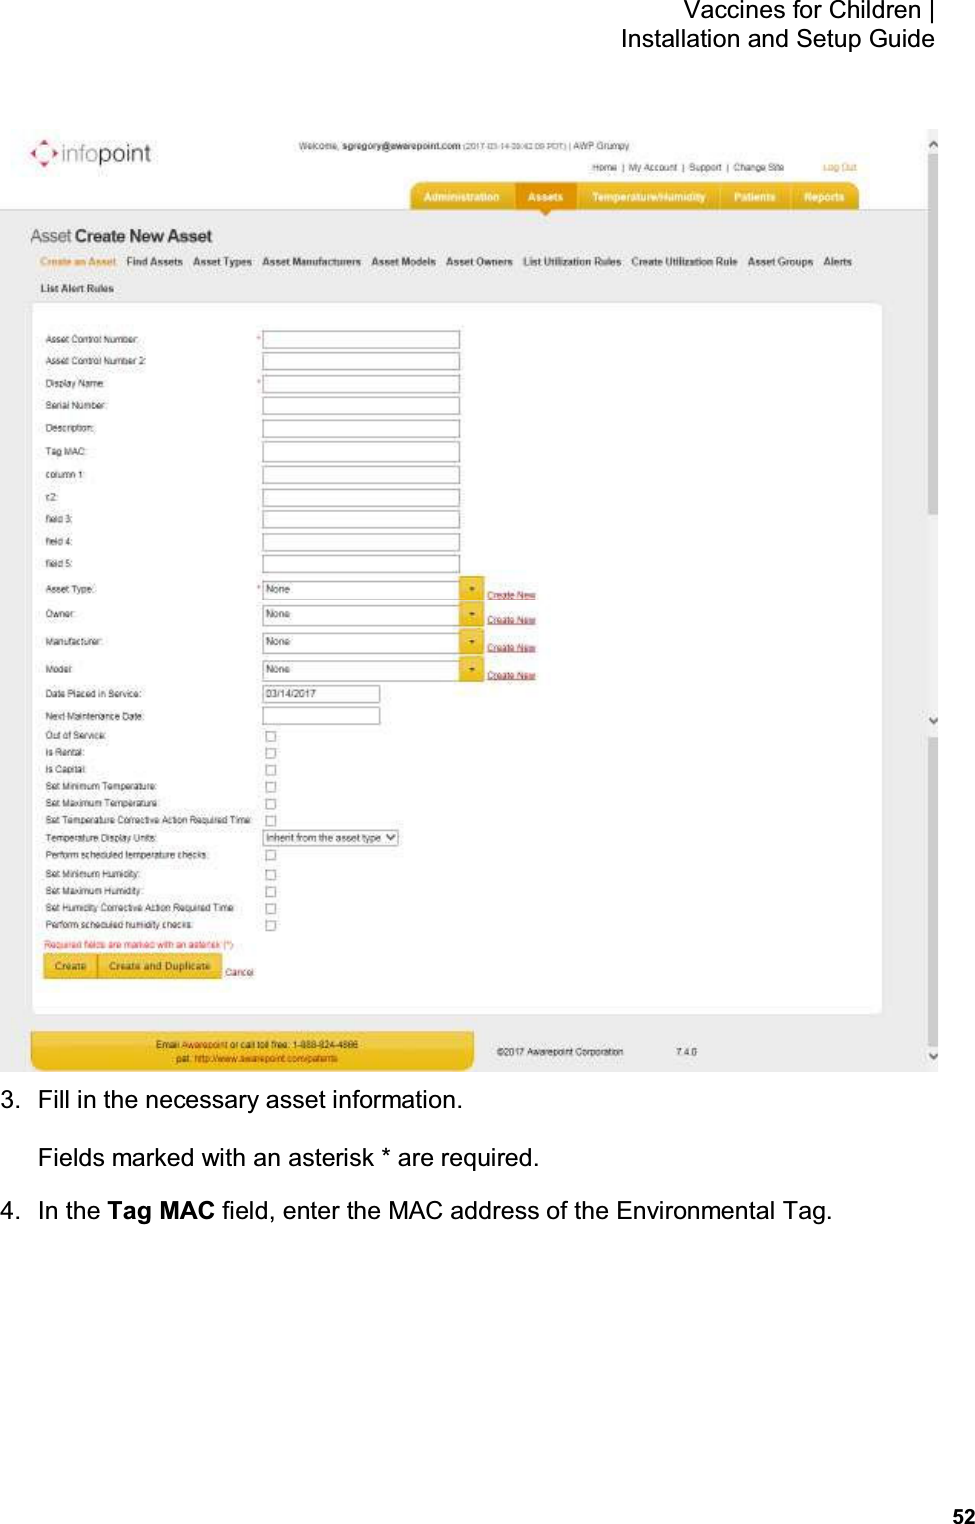           52 Vaccines for Children |  Installation and Setup Guide  3.  Fill in the necessary asset information. Fields marked with an asterisk * are required. 4.  In the Tag MAC field, enter the MAC address of the Environmental Tag. 